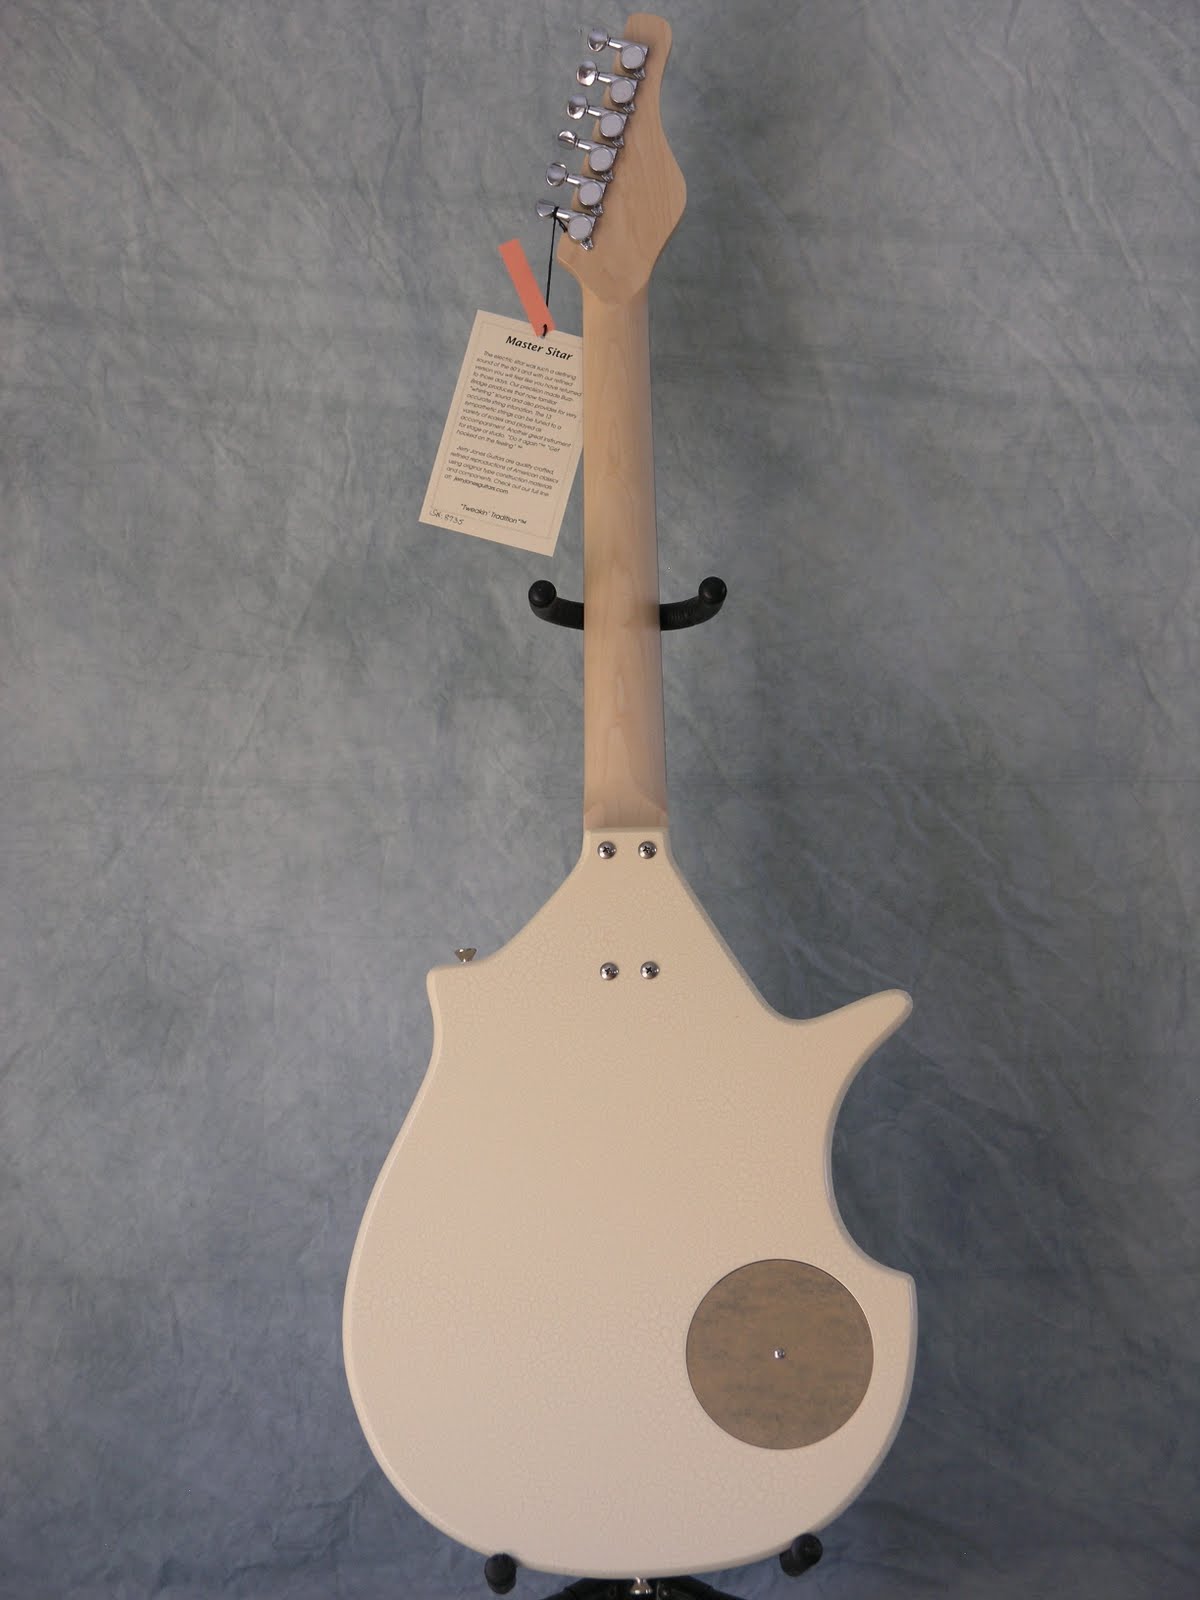 Jerry S Lefty Guitars Newest Guitar Arrivals Updated Weekly Jerry